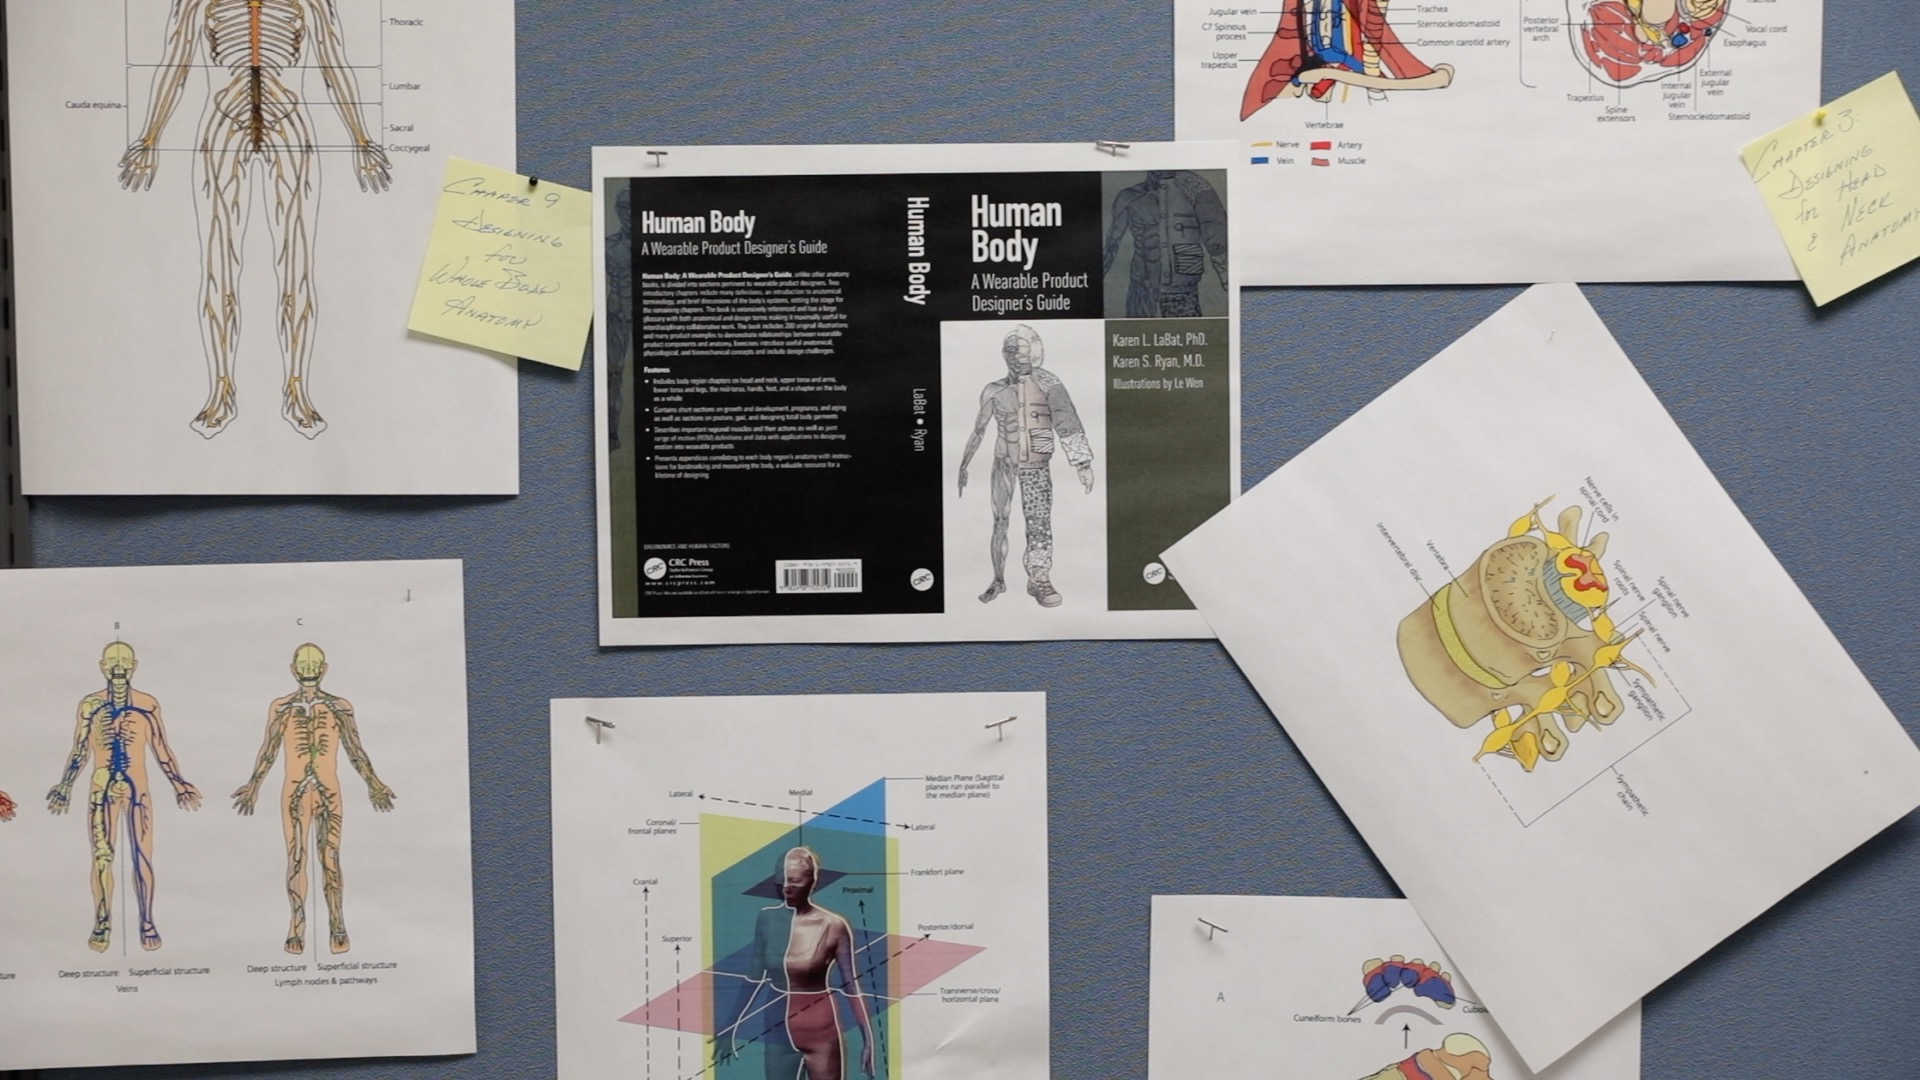 Bulletin board covered in papers with anatomical graphics and research notes